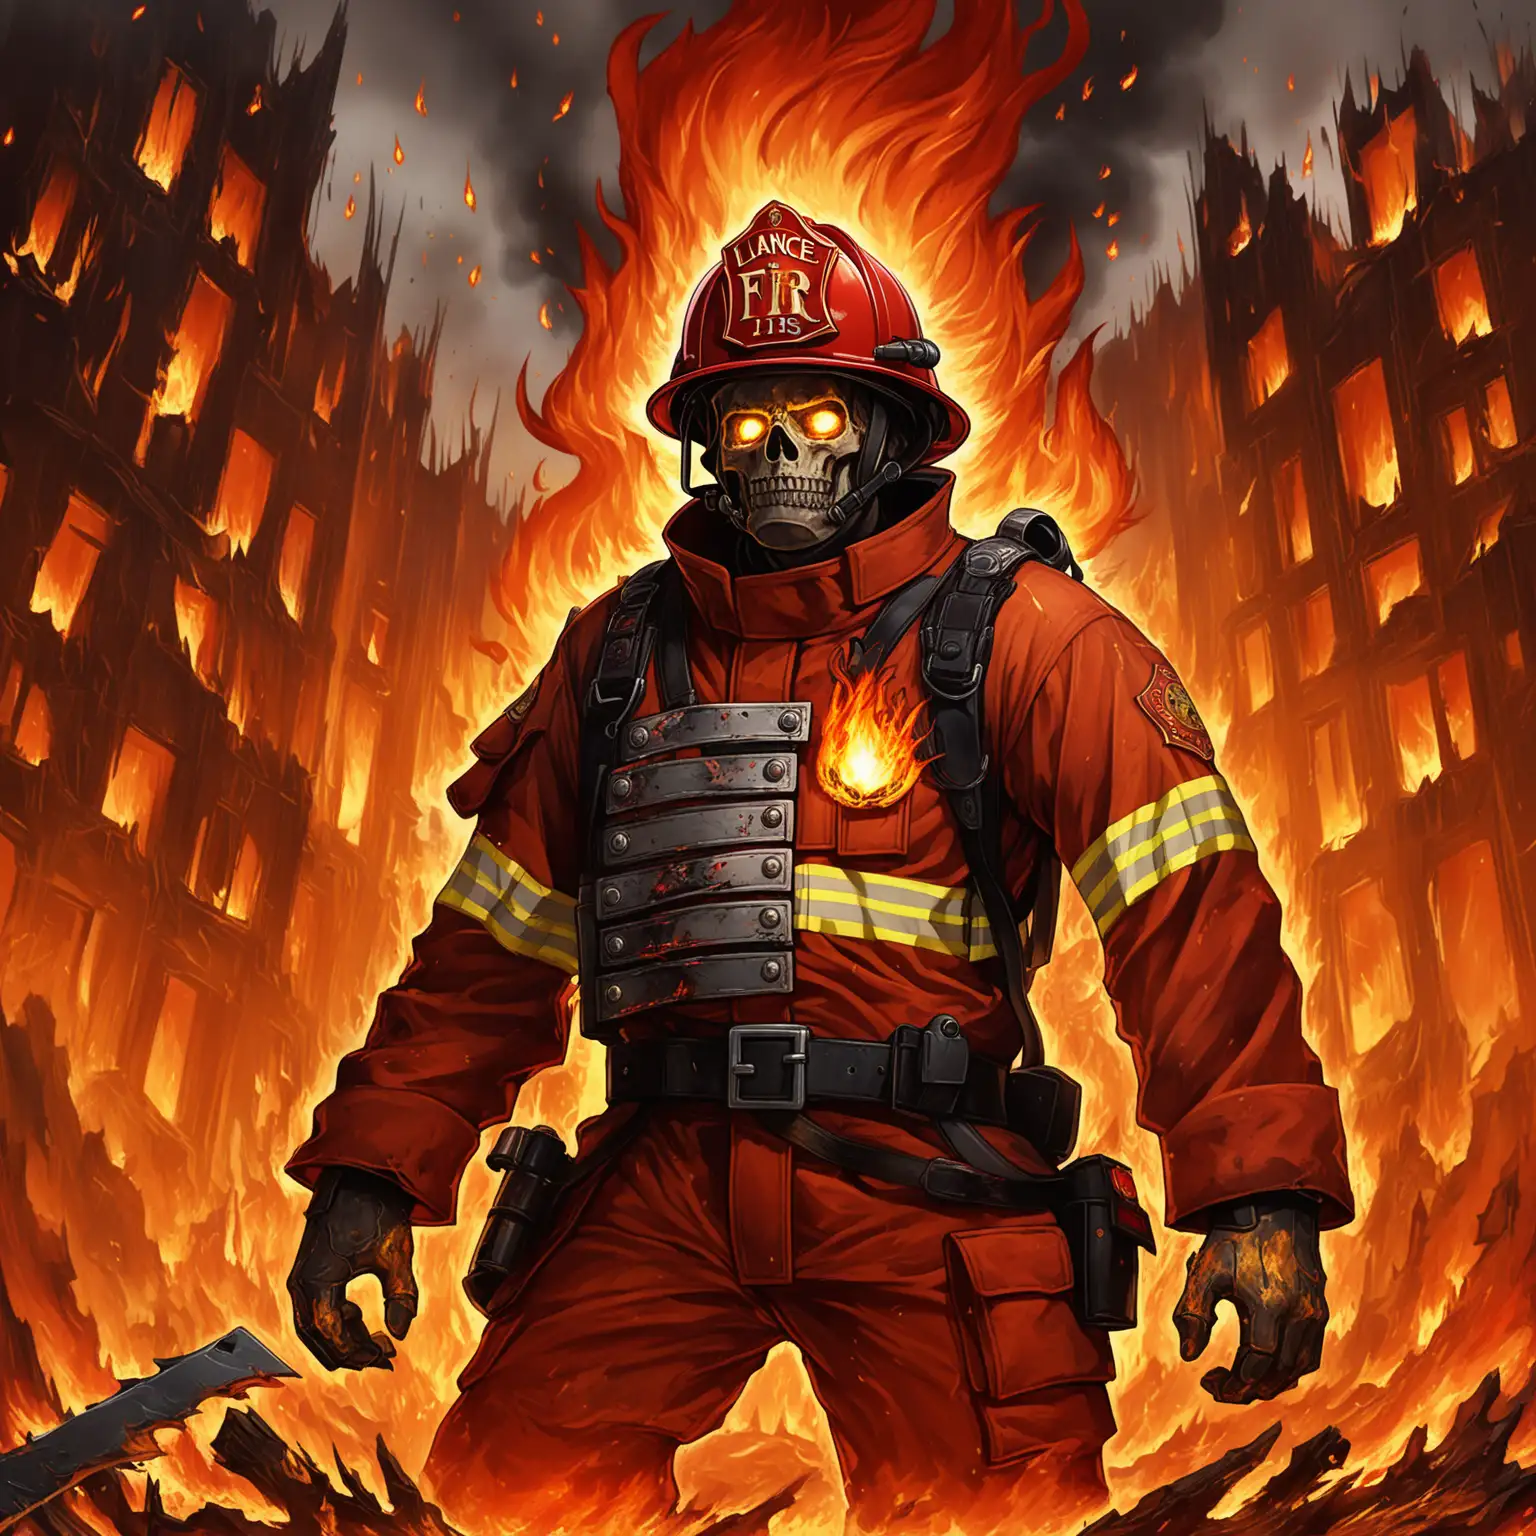 Background: The background of the card is a gradient of intense oranges, reds, and yellows, mimicking the colors of roaring flames. Flickering animations of fire could add to the dynamic feel. Silhouettes of burning buildings and charred remnants are faintly visible in the backdrop, hinting at his destructive tendencies and tragic past.nPortrait: Lance’s face is prominently featured in the center of the card. His expression is one of grim determination, with a slight hint of madness in his eyes.nHis skin is rugged and weathered, showing signs of burns and soot, indicative of his time spent amid fires.nHe has short, messy hair with singed tips, adding to the image of someone constantly surrounded by flames.nHis eyes are a striking amber, glowing subtly to imply an inner fire and intensity.nAttire: Lance is wearing a scorched firefighter’s uniform, with parts of it burned away to reveal protective gear underneath. The uniform is dark with reflective stripes, and his firefighter helmet, dented and charred, is either on his head or hanging from his neck.nHe has a makeshift bandolier across his chest, adorned with fire-related tools and weapons, such as small incendiary devices and a hatchet.nAccents: The edges of the face card are decorated with animated embers and smoke trails, giving the impression that the card itself is smoldering.nA faint overlay of ash occasionally drifts across the card, enhancing the theme of destruction and fire.nNameplate: At the bottom of the card, his name 'Lance 'Scorch' Fuego' is displayed in bold, fiery text with a cracked, molten rock effect.nThe text flickers slightly, as if it is being licked by flames.